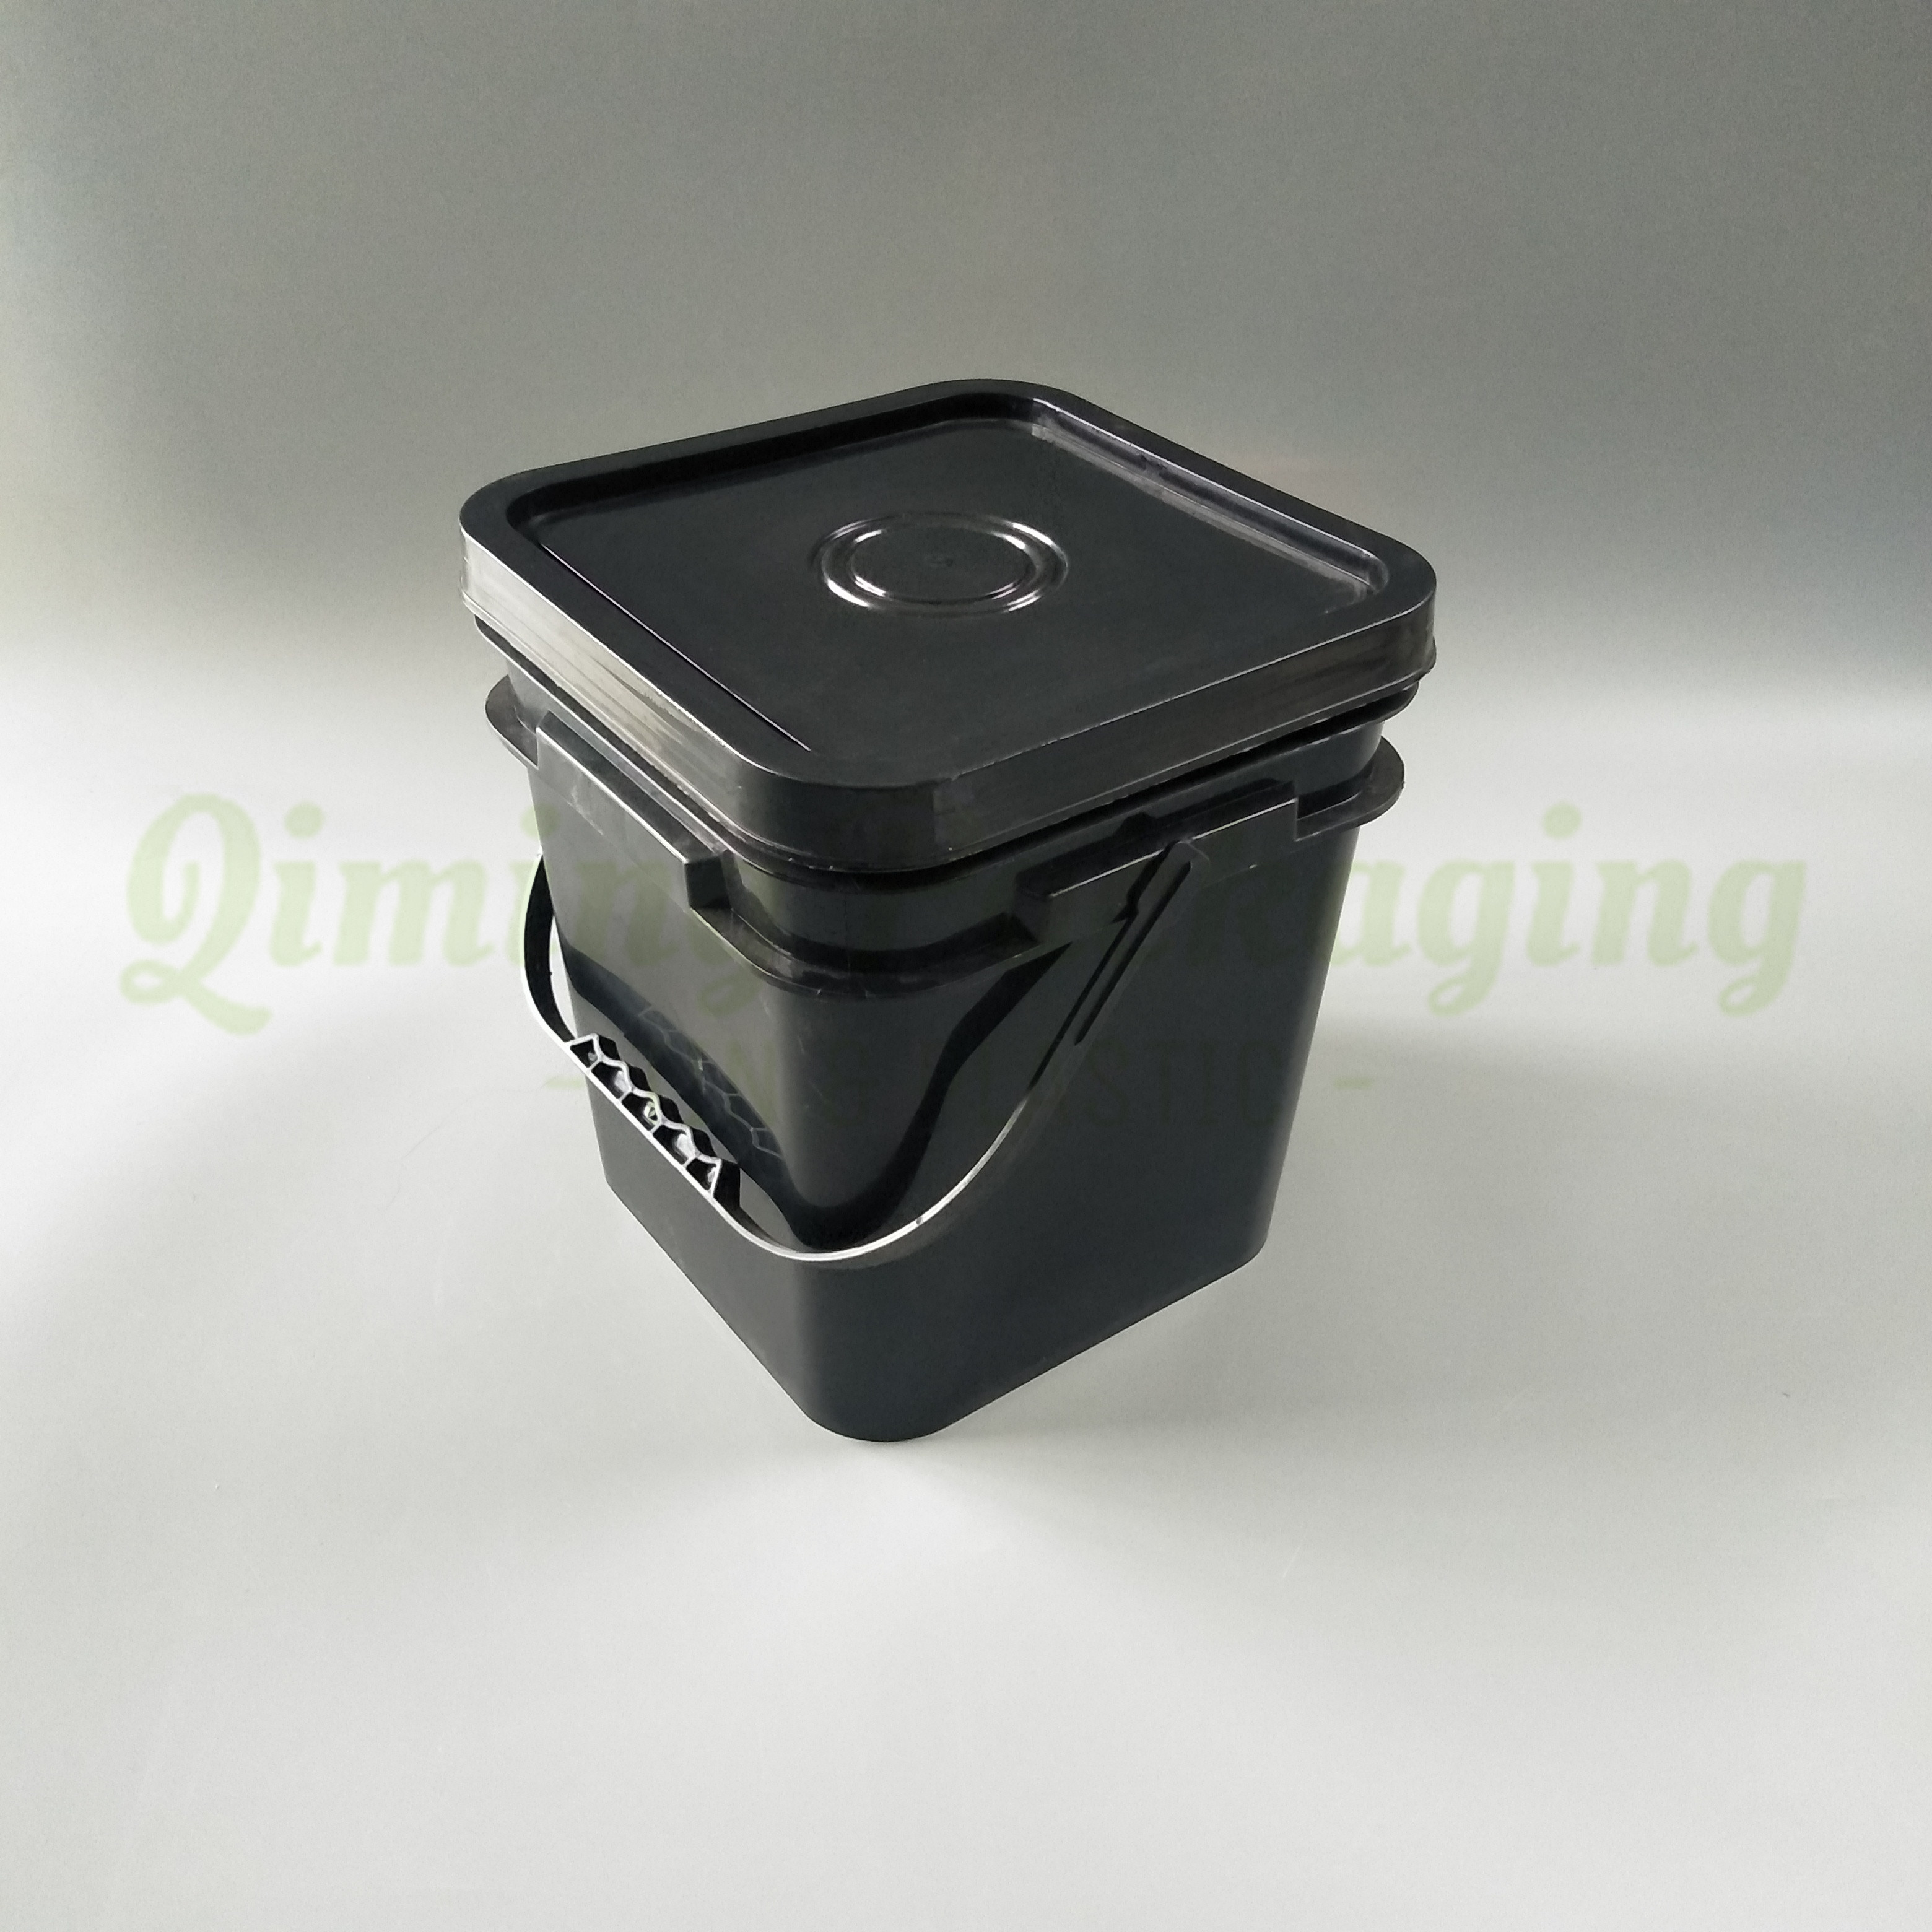 Wholesale Square Plastic Pails Buckets - Qiming Packaging Lids Caps  Bungs,Cans Pails Buckets Baskets Trays